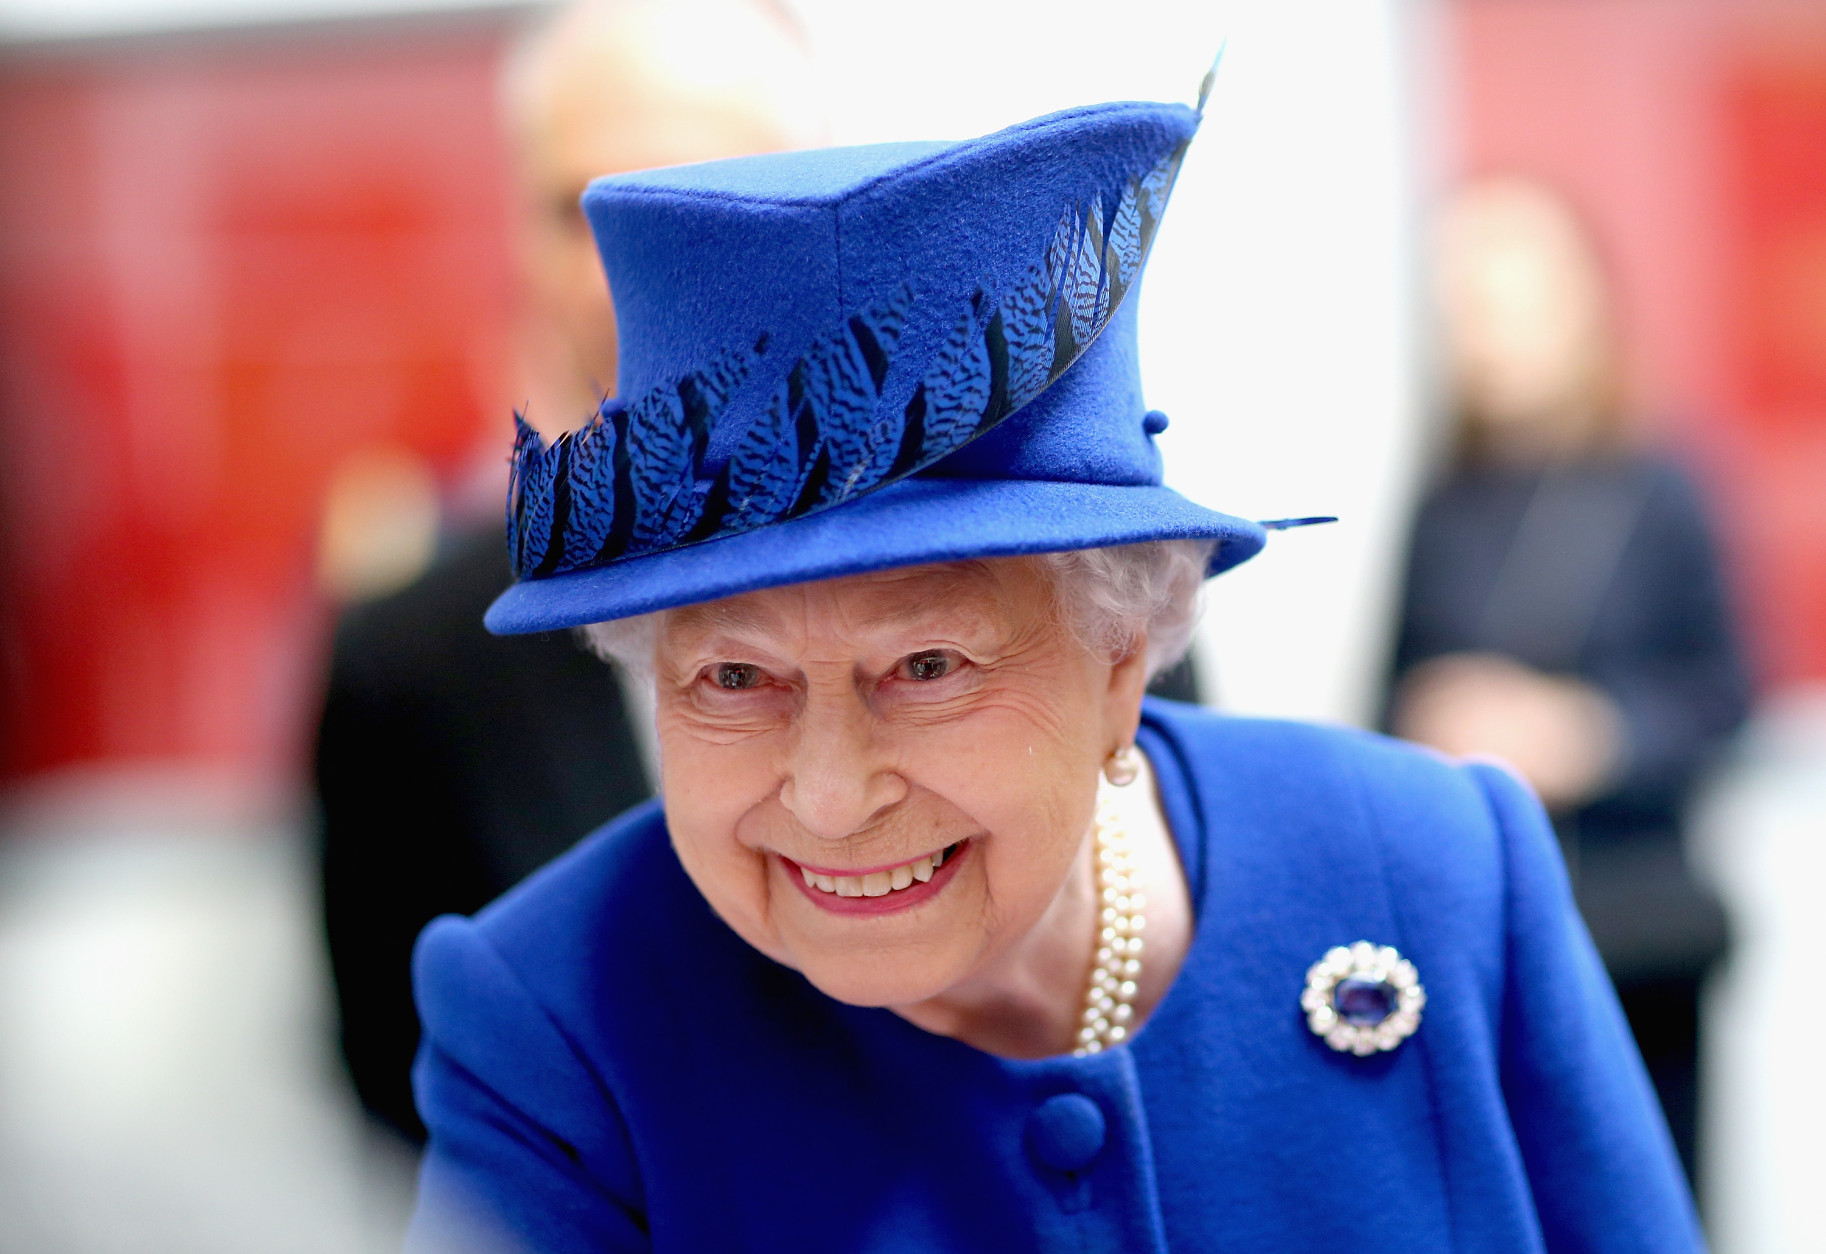 Queen Elizabeth II  smiles as she meets people being helped by the Prince's Trust at the Prince's Trust Centre in Kennington on March 8, 2016 in London, England. The Queen was visiting the Centre with Prince Charles, Prince of Wales to mark the 40th Anniversary of the Prince's Trust. TRH's saw the impact the Prince's Trust has on young people and heard about the six  programmes run by the Trust to help disadvantaged young people ages 13 to 30 to get into education and employment.  (Photo by Chris Jackson - WPA Pool/Getty Images)